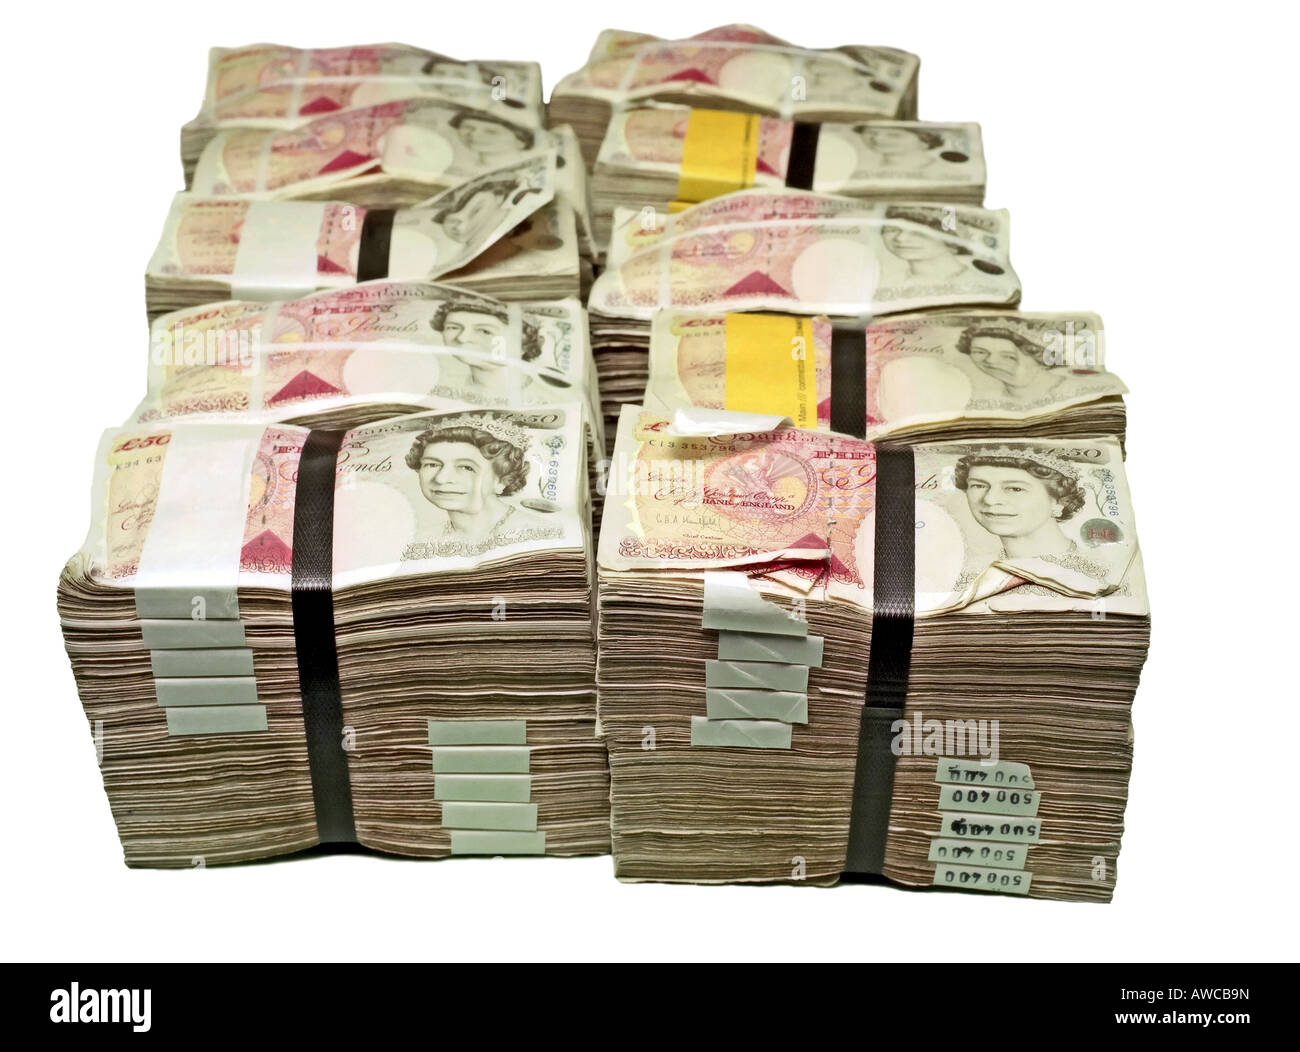 Million Pounds Cash High Resolution Stock Photography and Images - Alamy